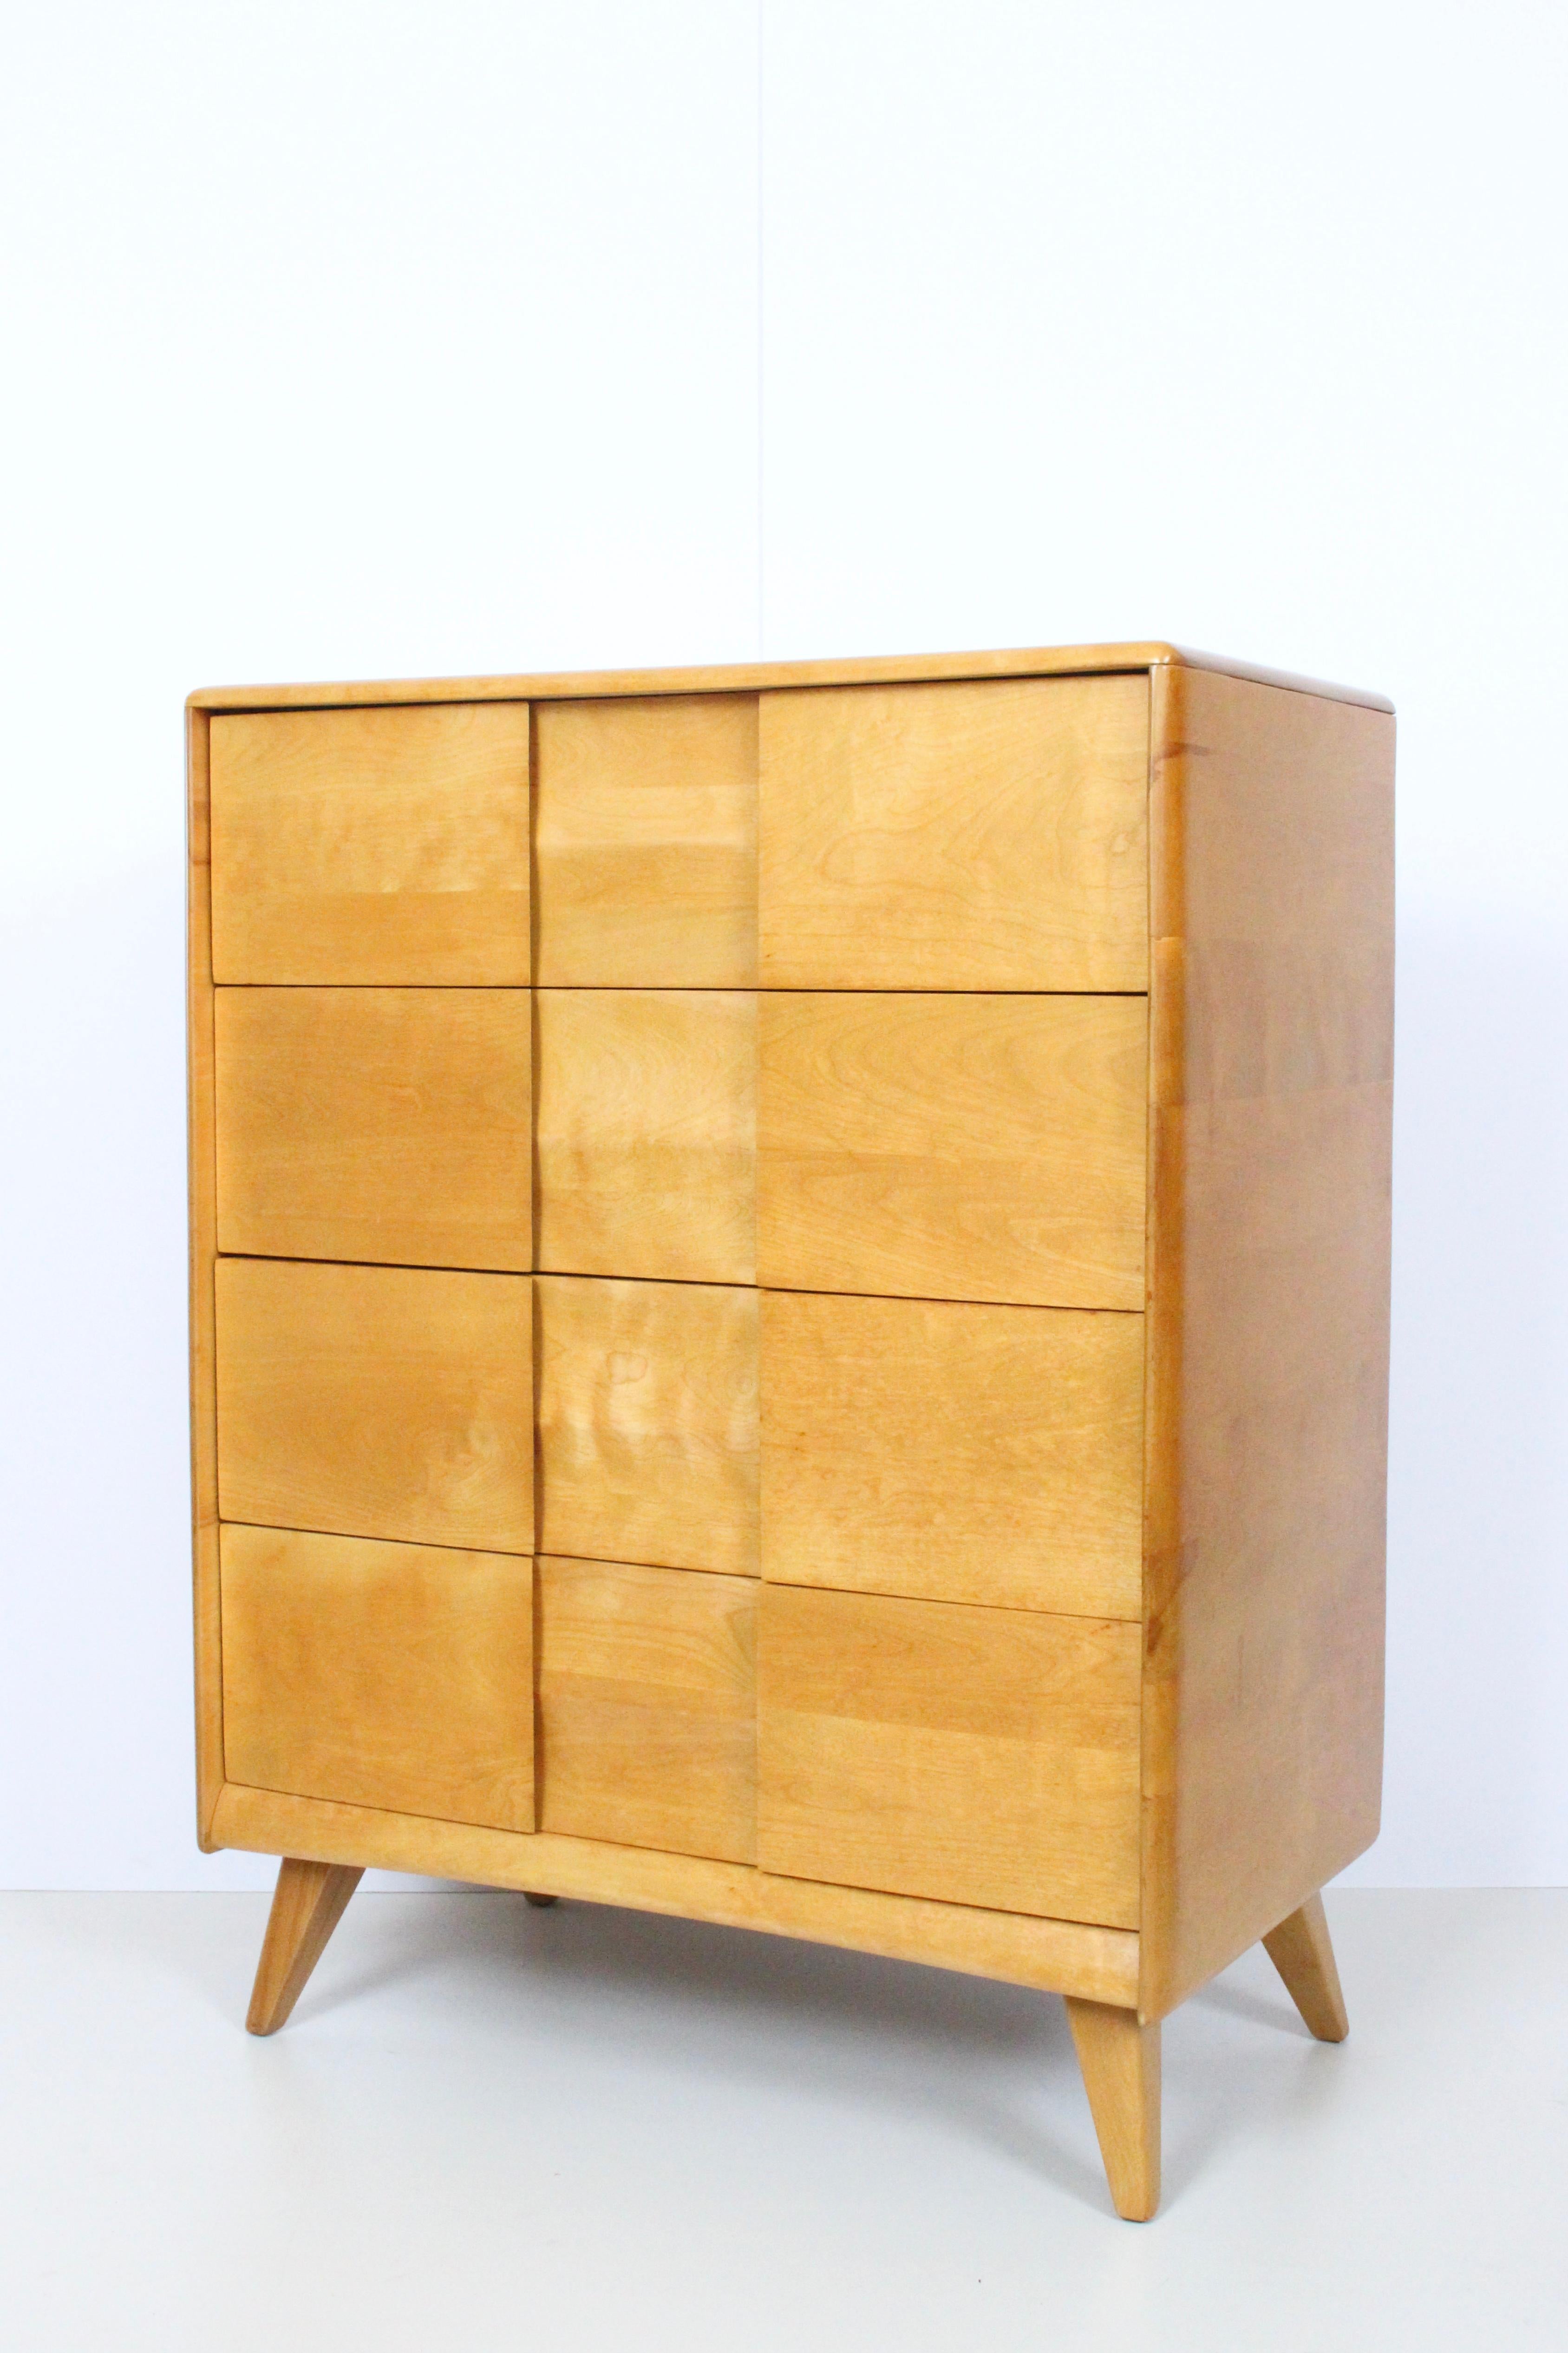 Classic Heywood Wakefield Trophy Series solid maple chest of drawers, highboy, wheat finish, 1950's. Featuring heavy duty solid board construction. Sturdy. Hollywood Regency. Rarity.
 